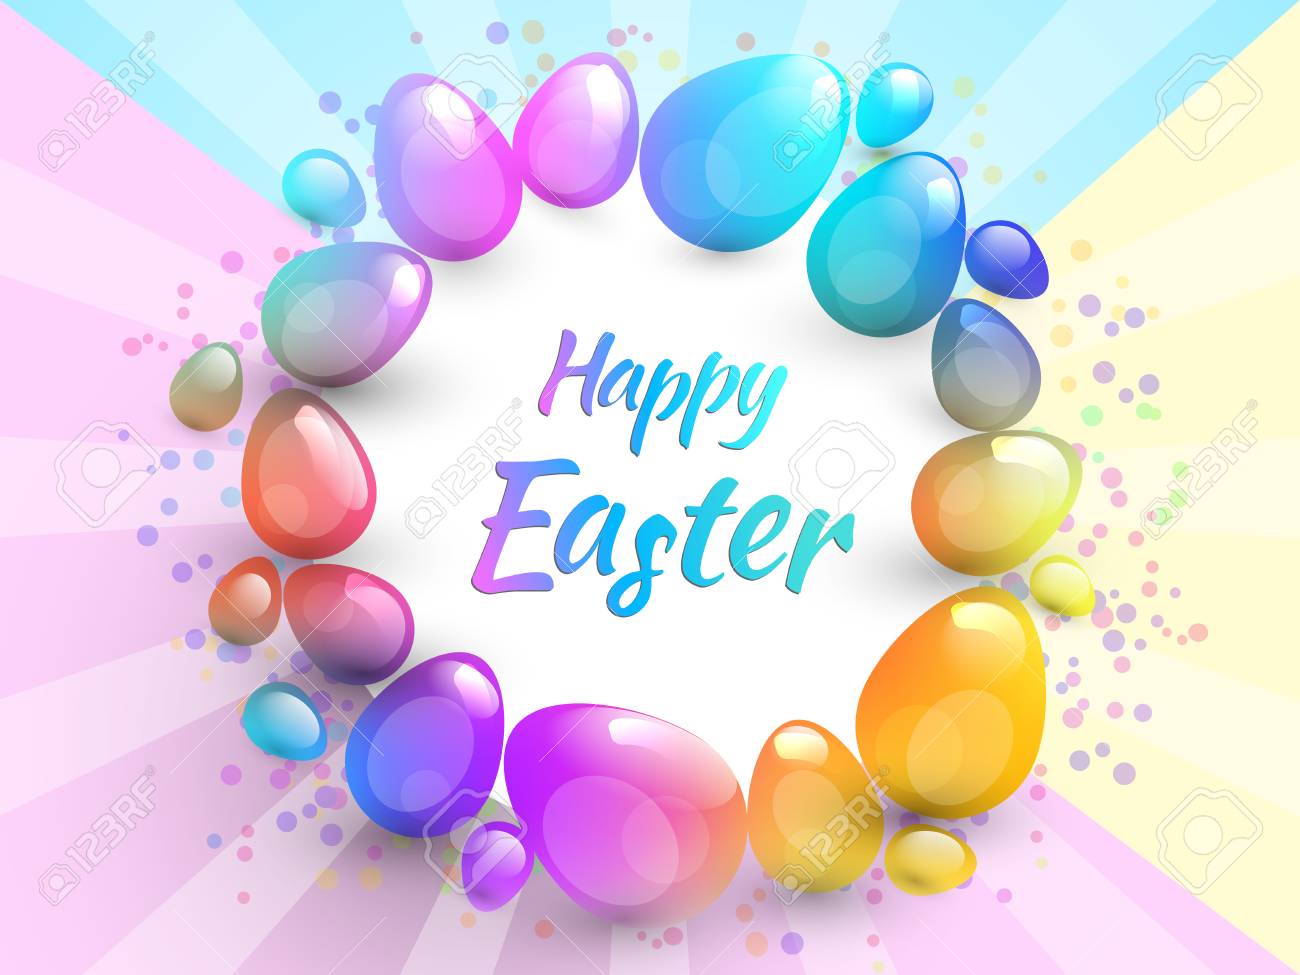 Happy Easter Background With Realistic Easter Eggs Royalty Free